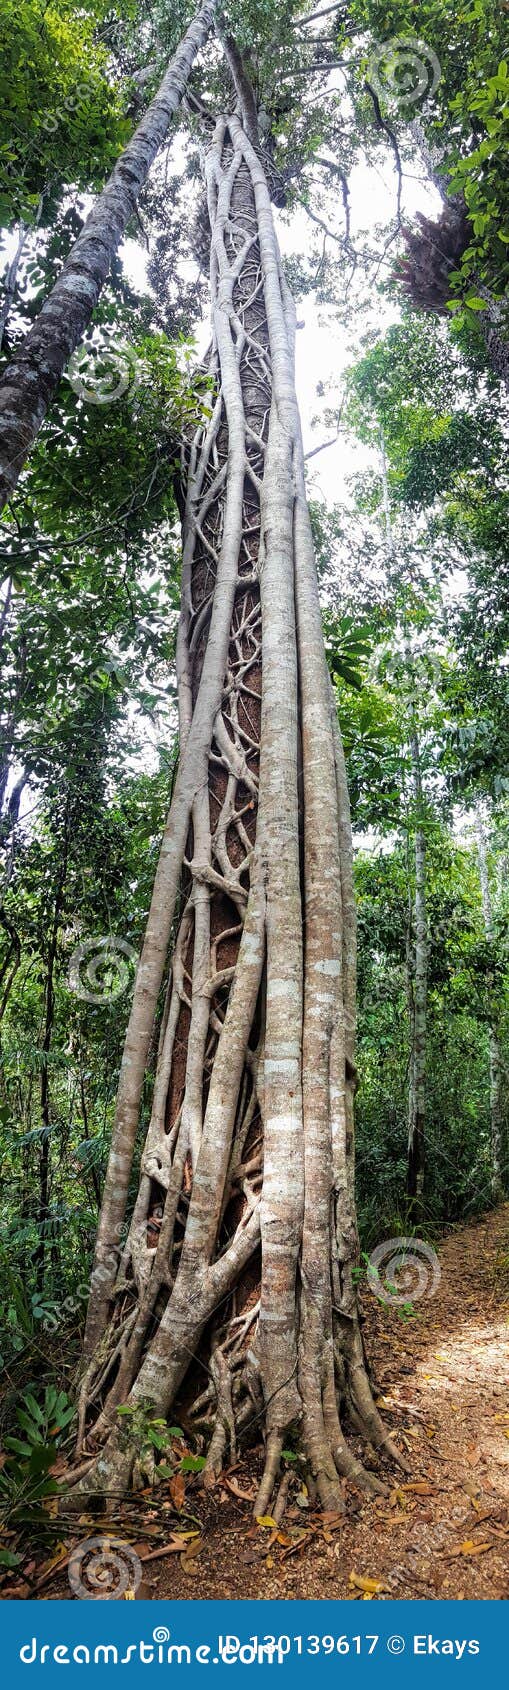 strangler fig tree in the tropical forest panaroma view